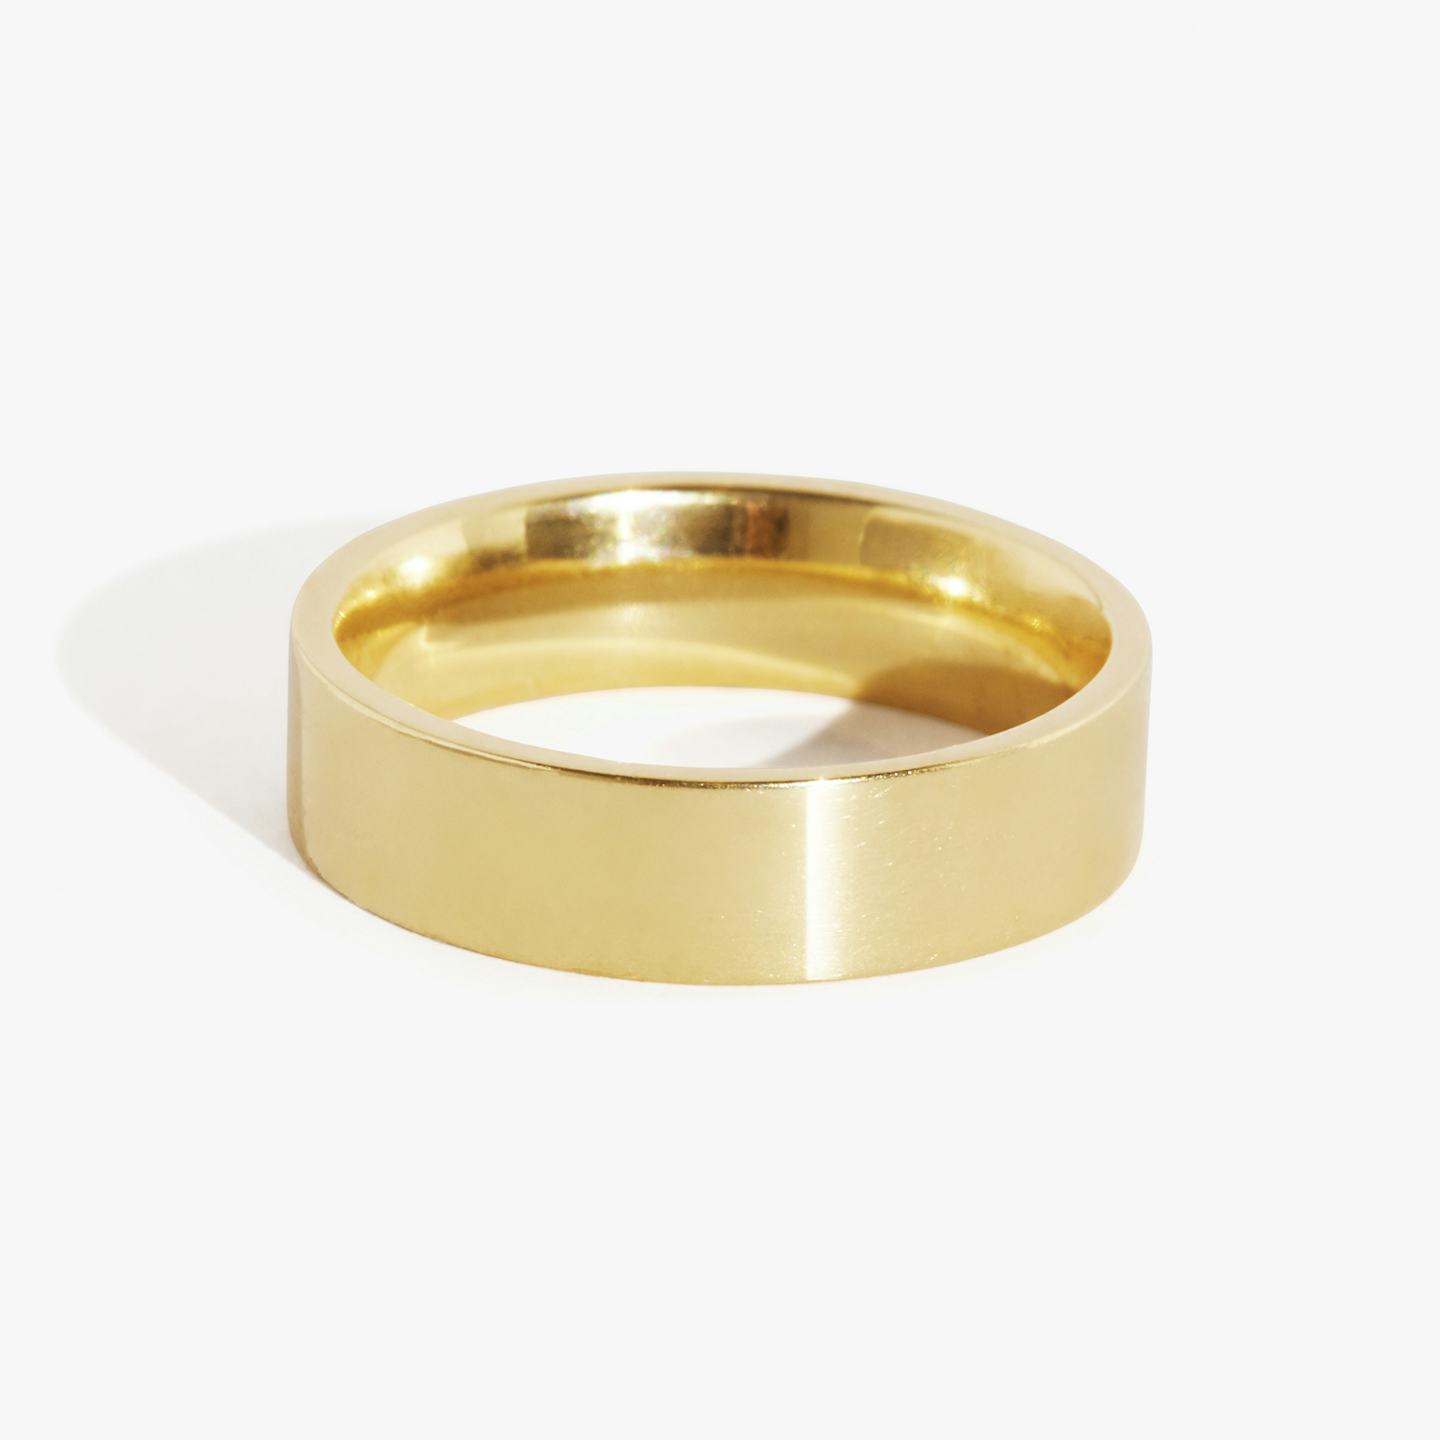 The Flat | 18k | 18k Yellow Gold | Band width: Large - 4.5mm